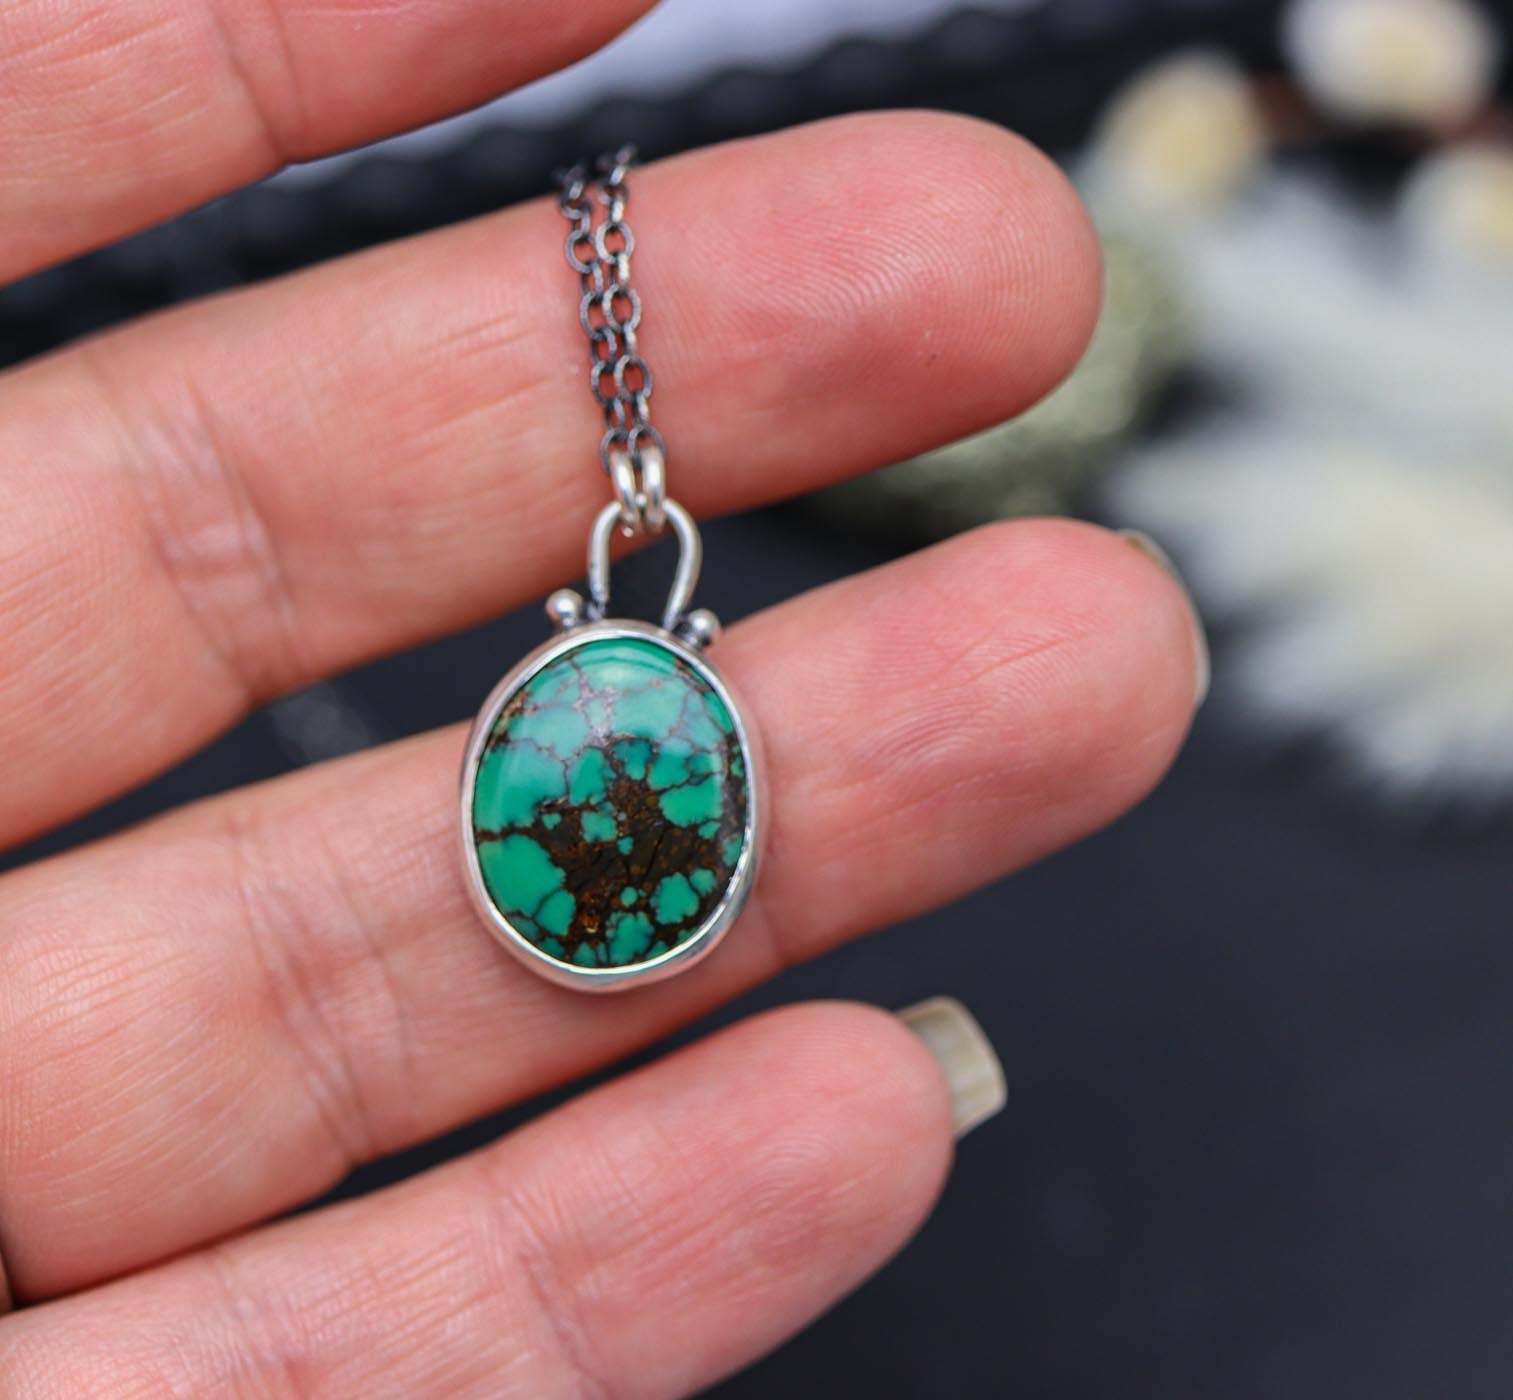 Turquoise Pendant Necklace Sterling Silver